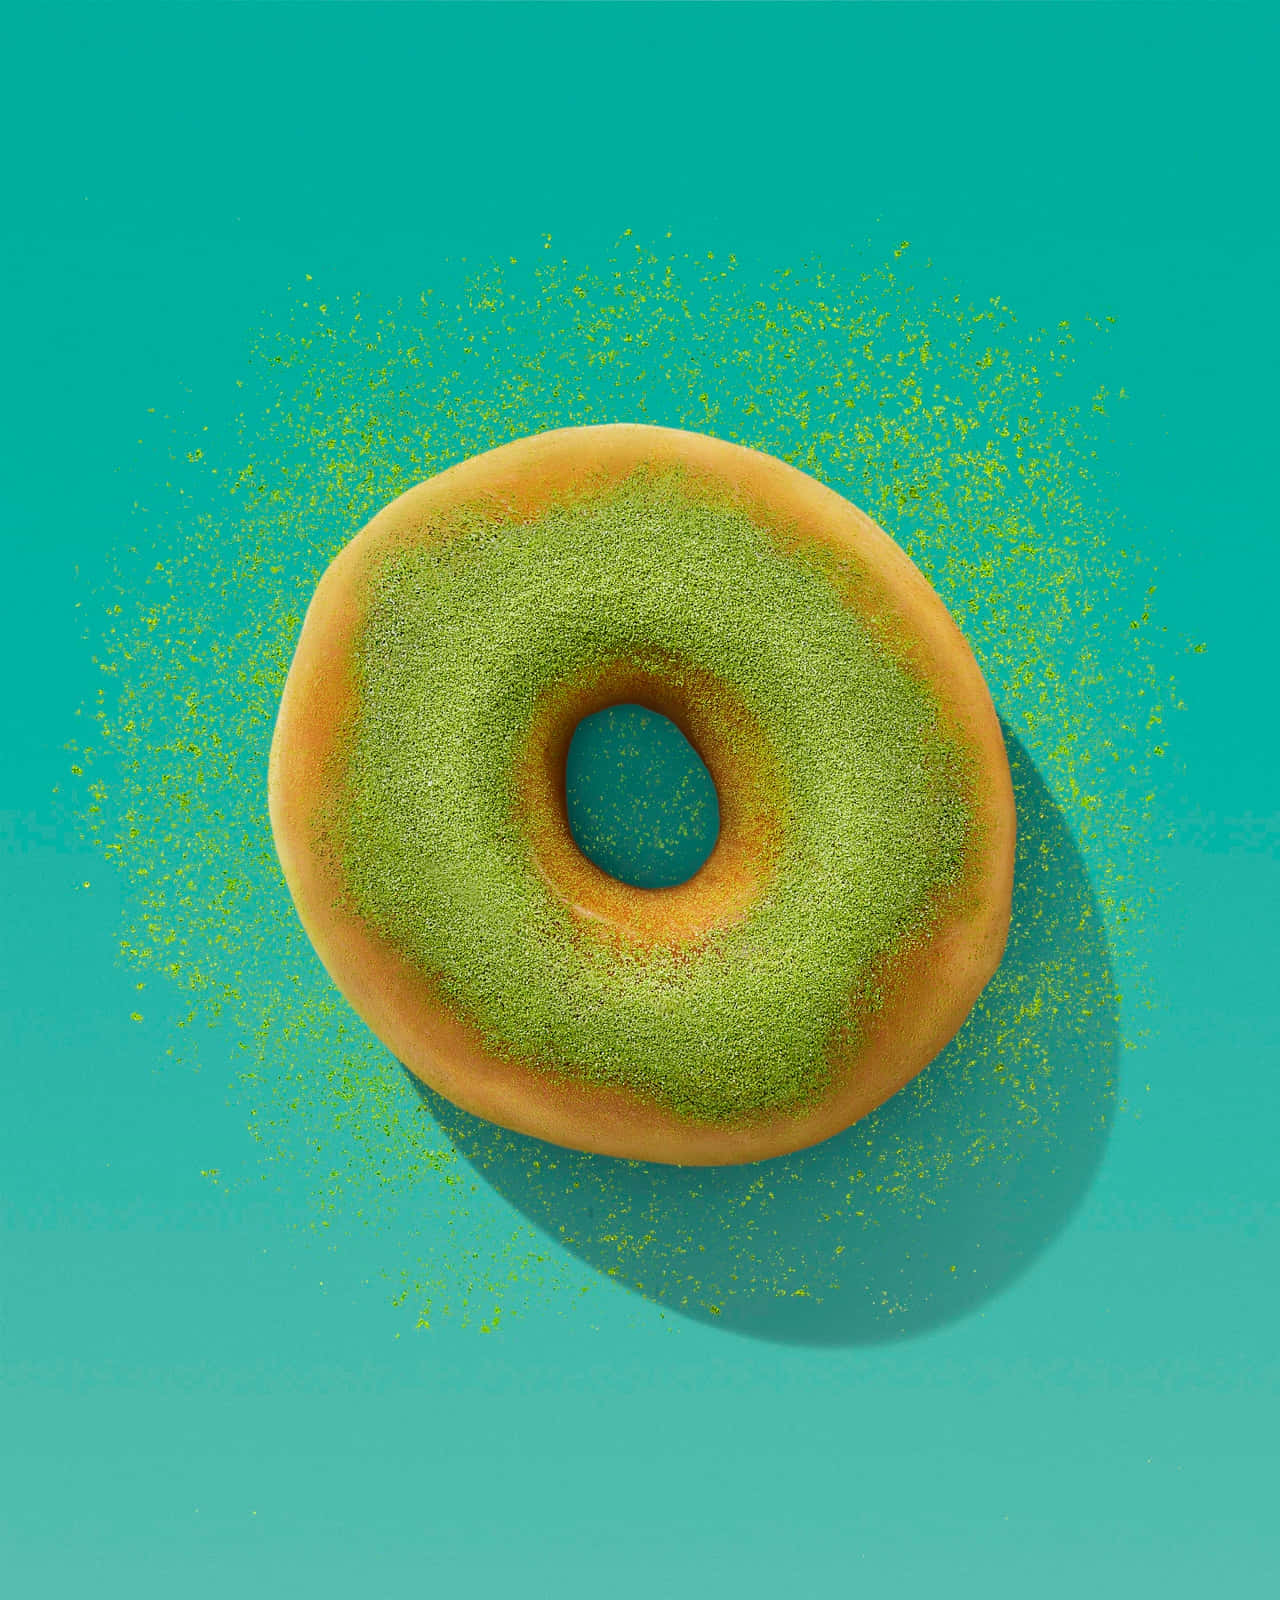 Enjoy a sweet treat with a classic donut!